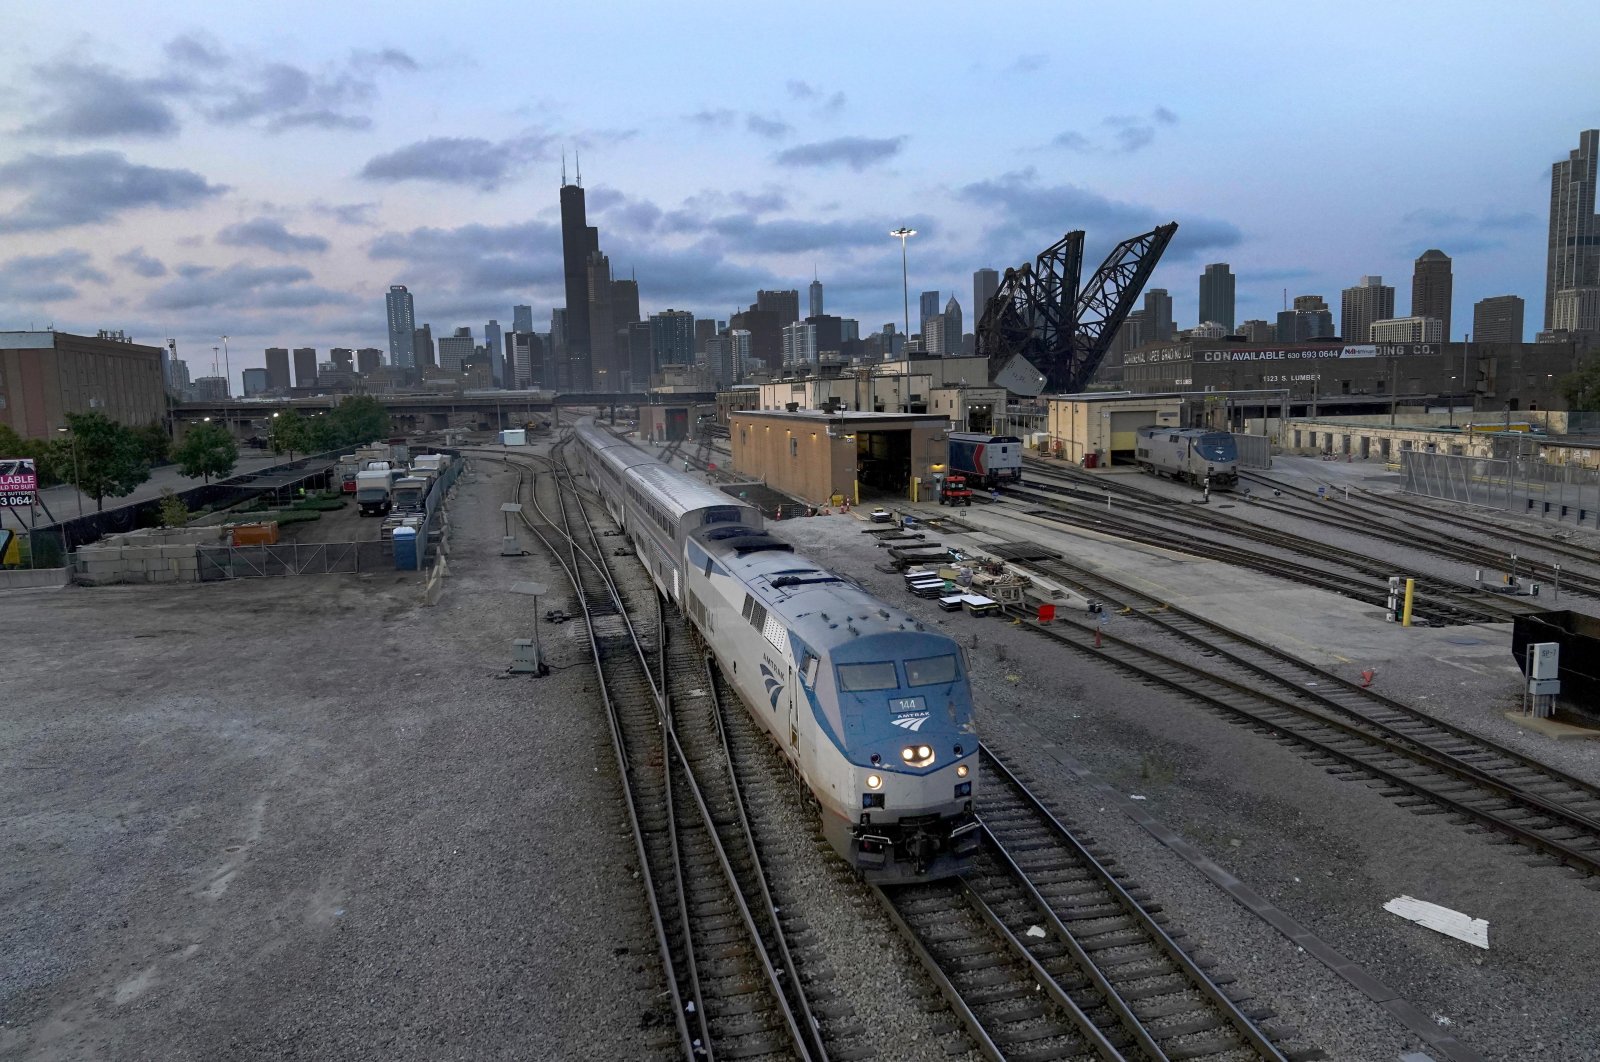 An Amtrak passenger train departs Chicago in the early evening headed south, in Chicago, U.S., Sept. 14, 2022. (AP Photo)